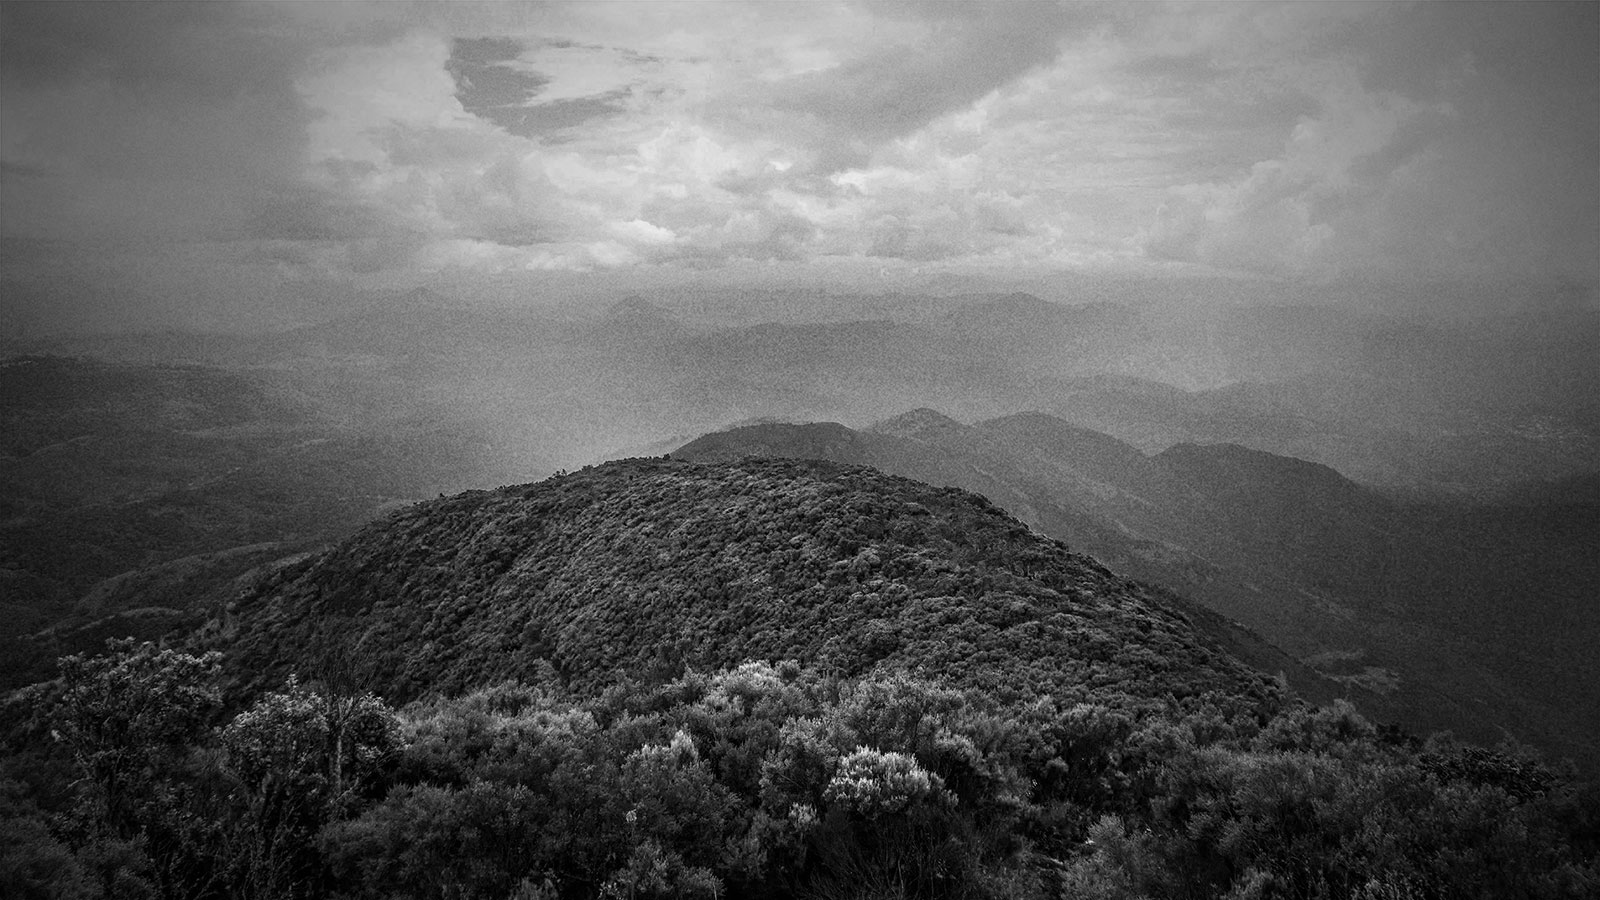 foreboding black and white photo of a tree covered mountain with more mountains fading into the distance